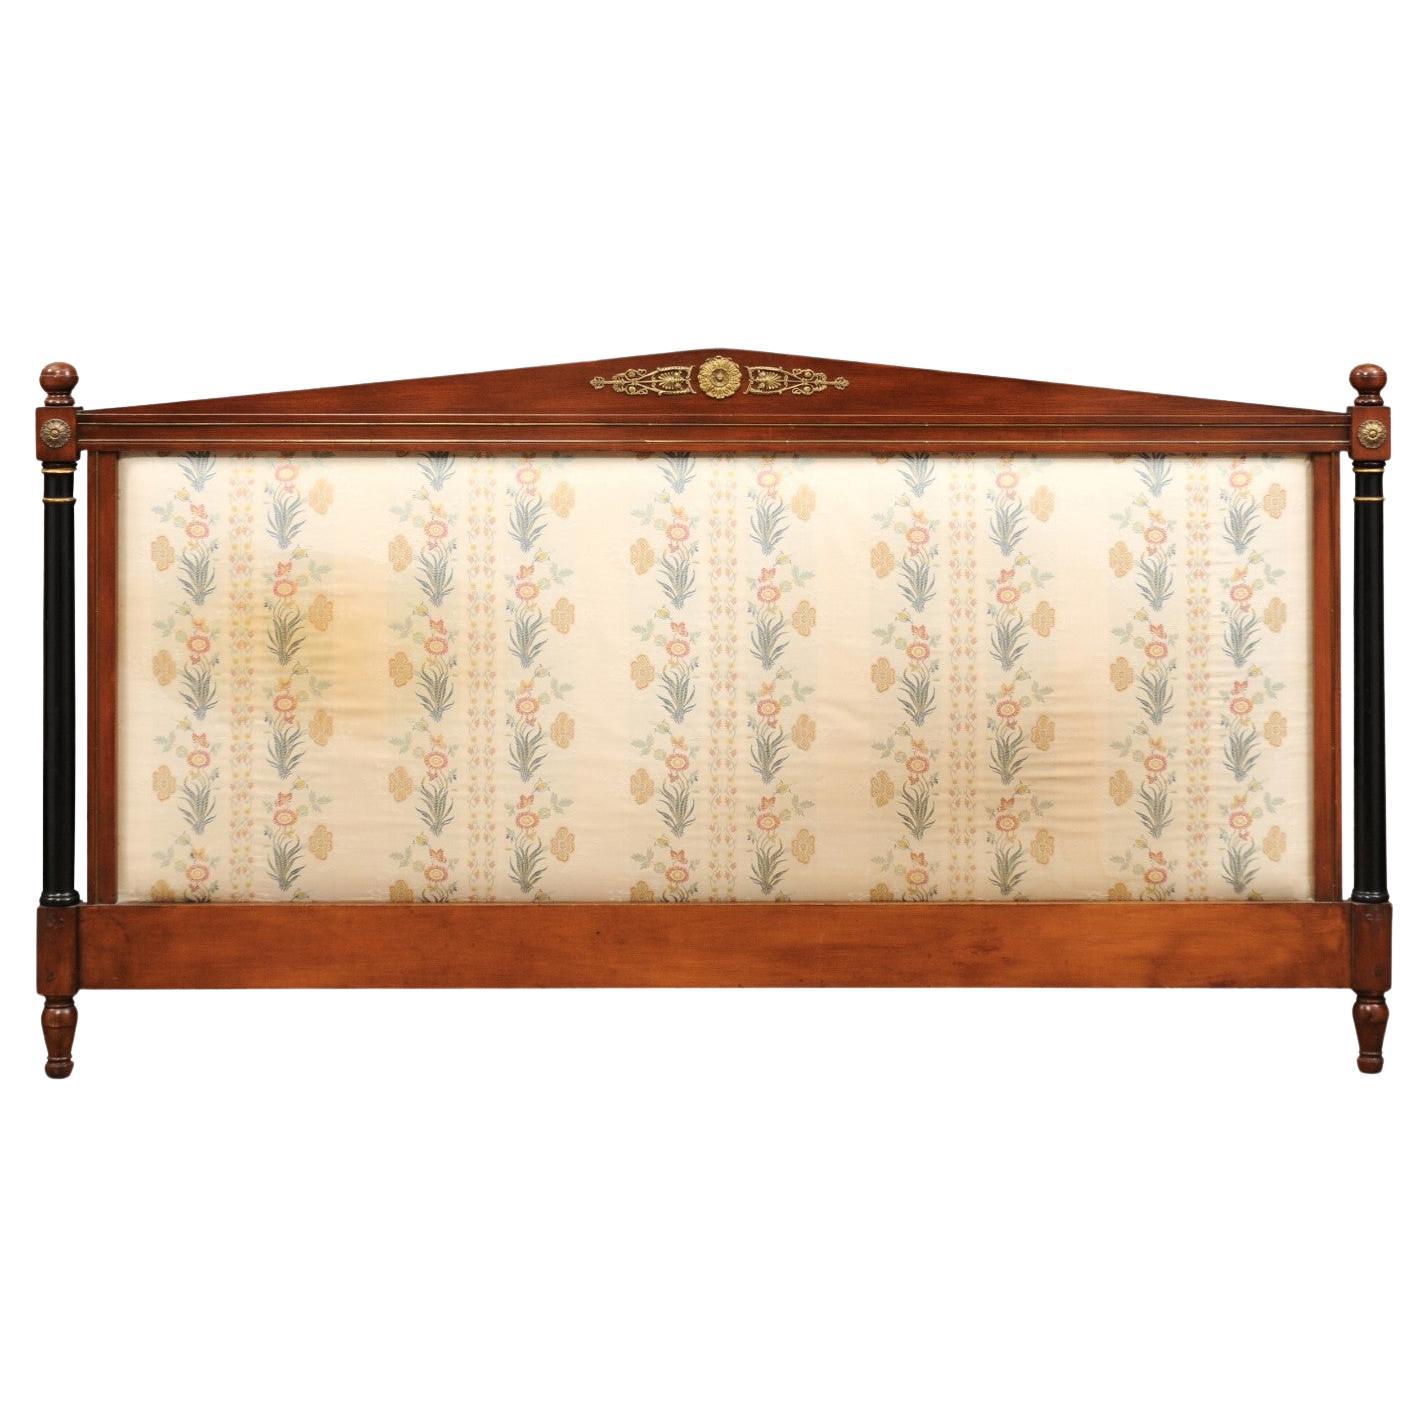 French Empire Style Mahogany Headboard with Silk Embroidery For Sale